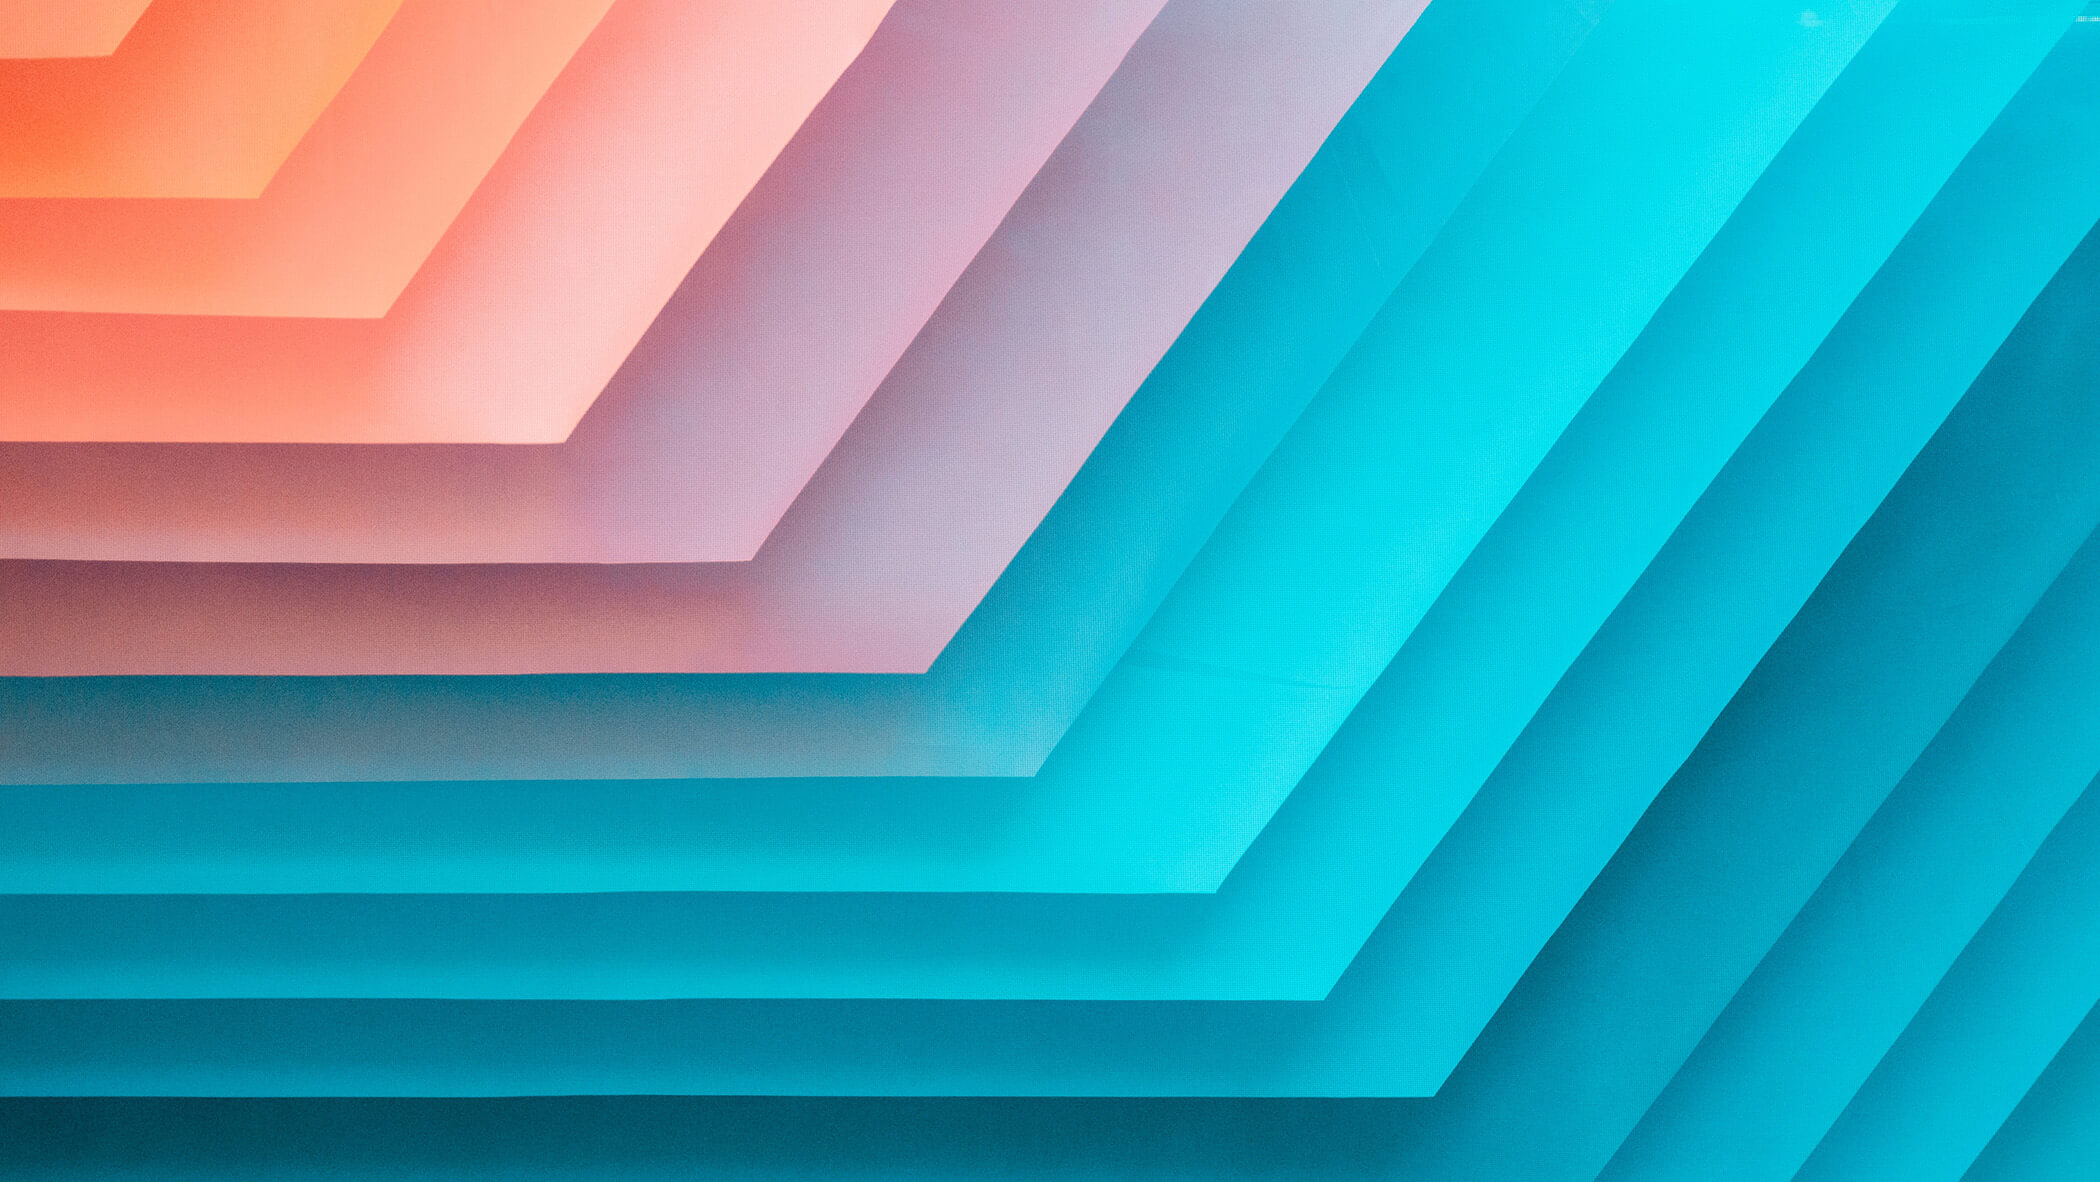 an abstract artwork of layered sheets, gradiated from a peach color in the upper left down towards a bright blue in the lower right